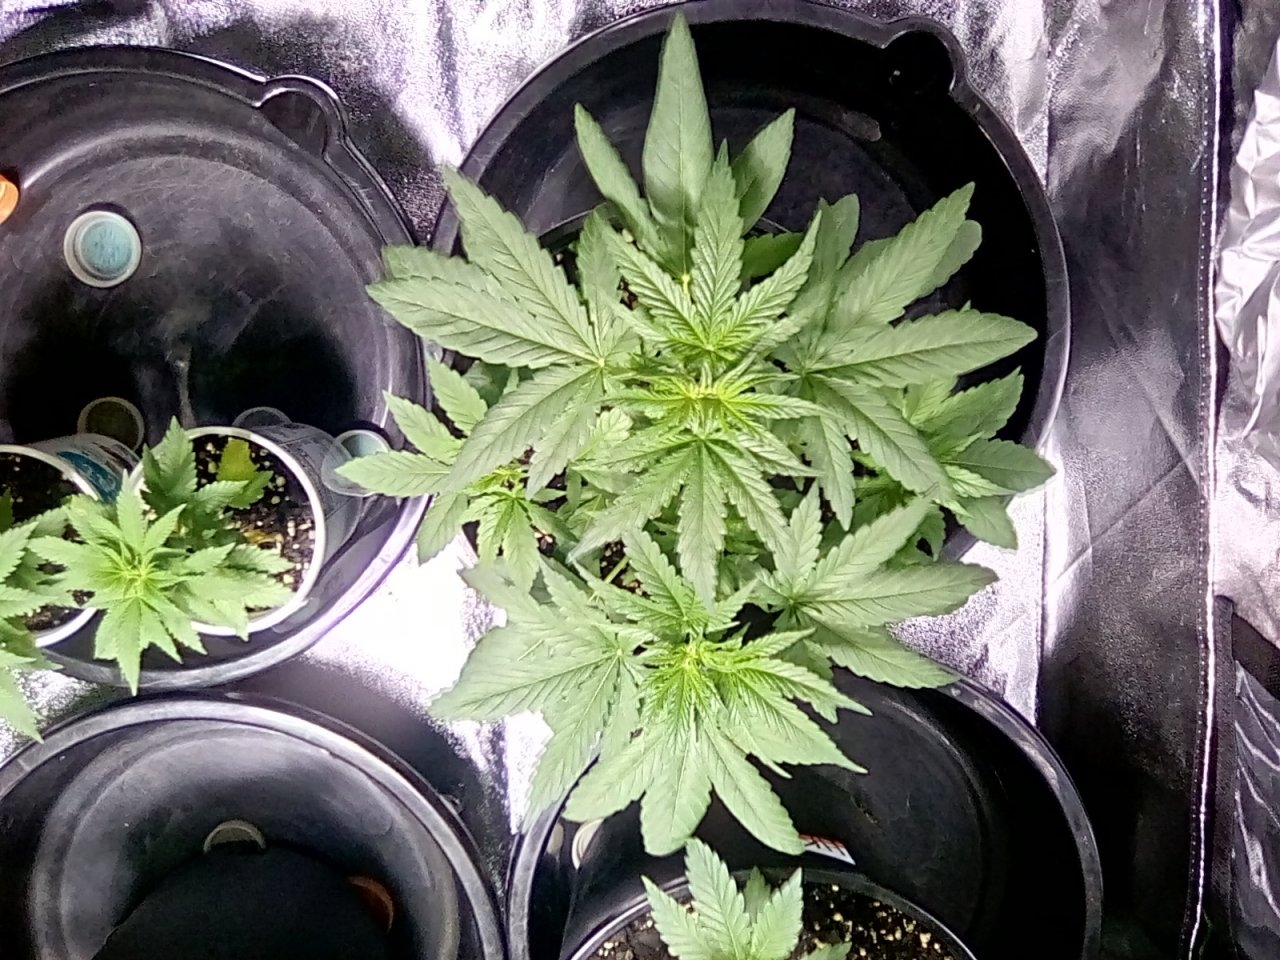 Fruity Pebbles probable male due to lack of symmetry in leaves and has already alternated nodes with leaf spurs pointing straight up and not crossing